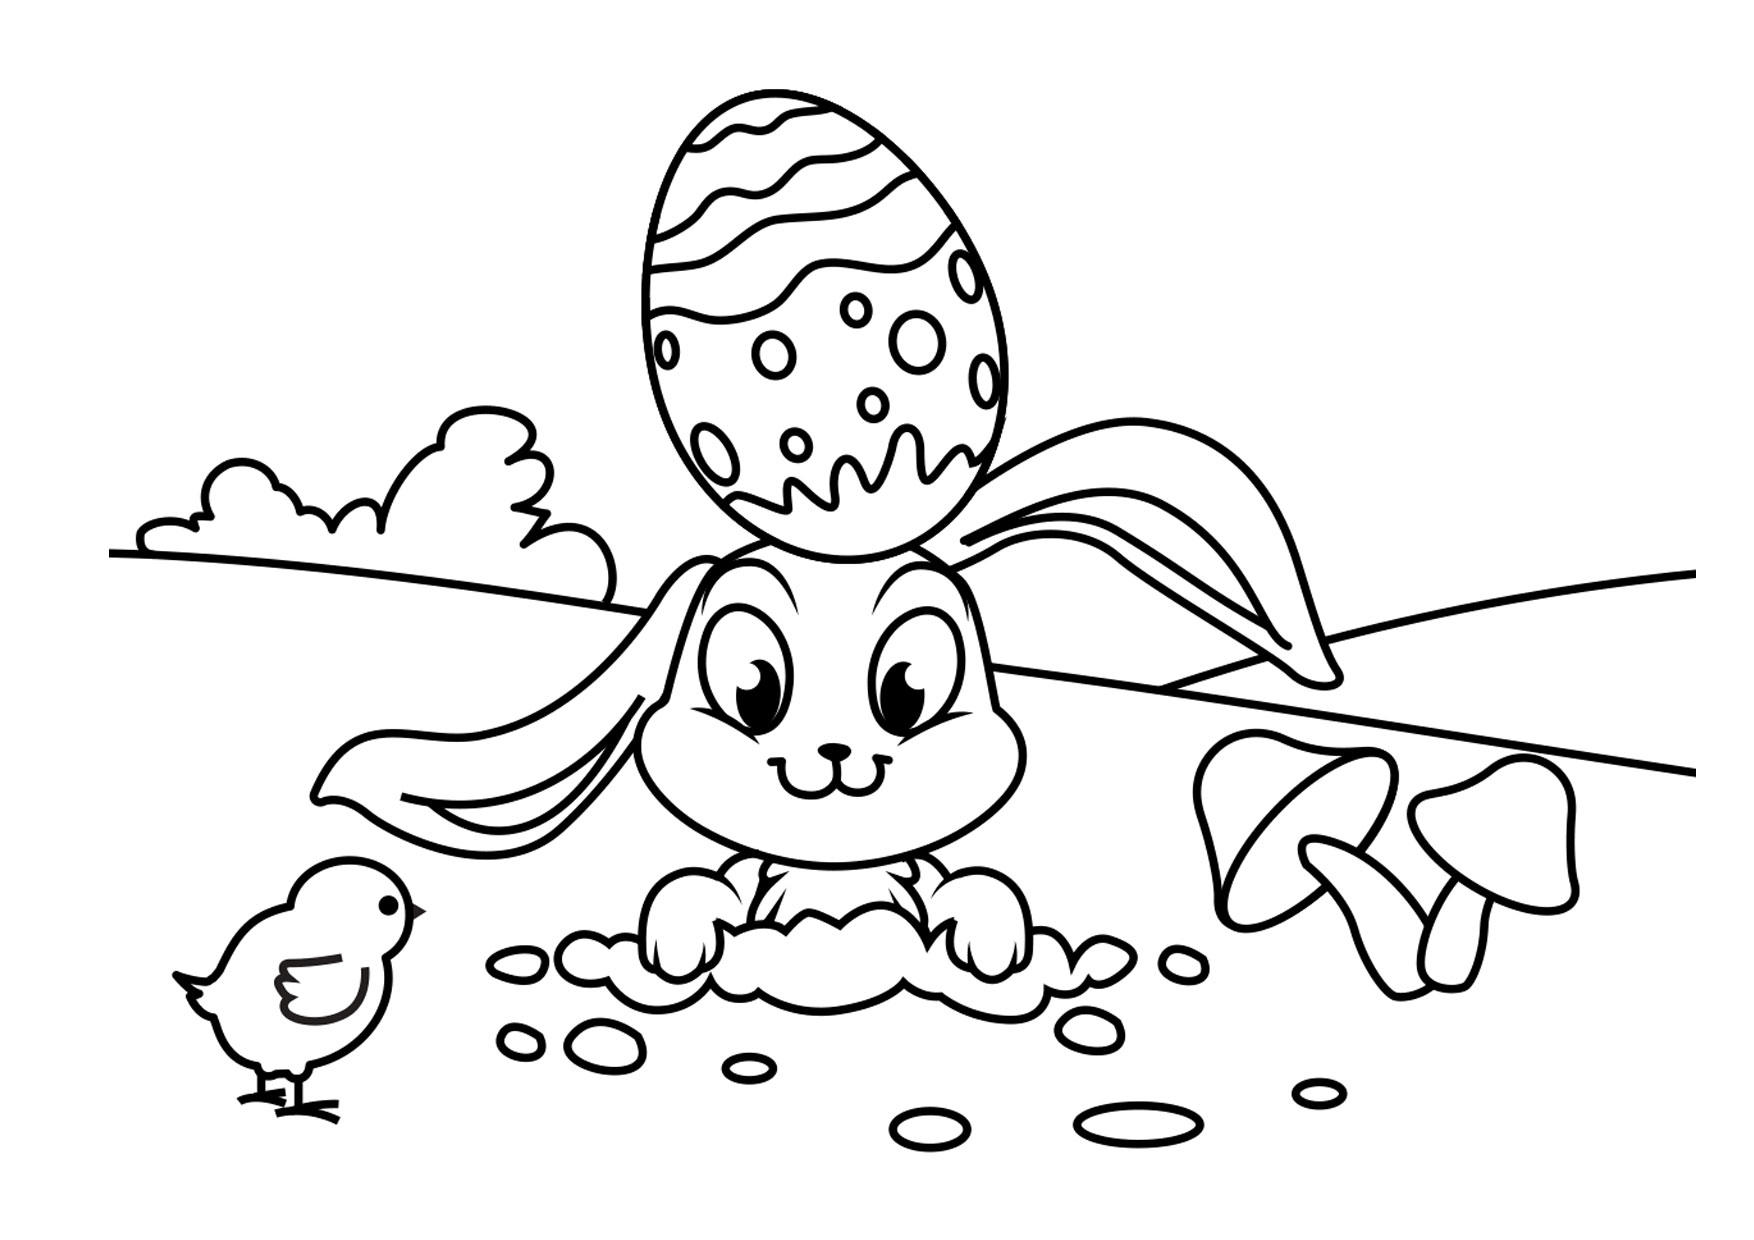 Coloring Page Easter bunny with chick   free printable coloring ...